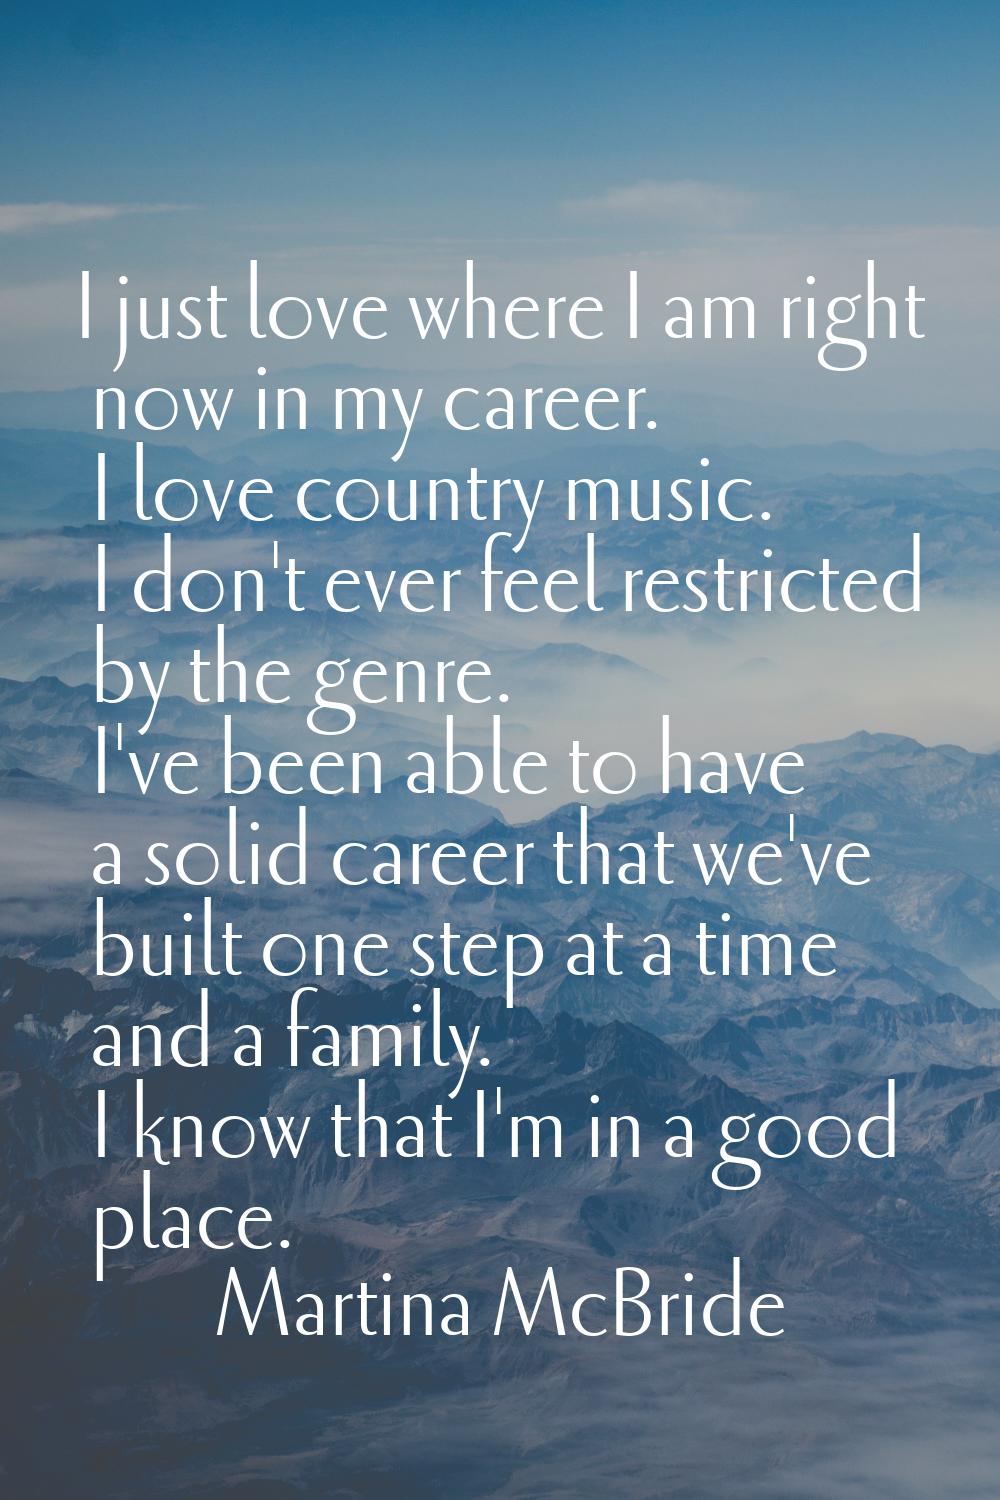 I just love where I am right now in my career. I love country music. I don't ever feel restricted b